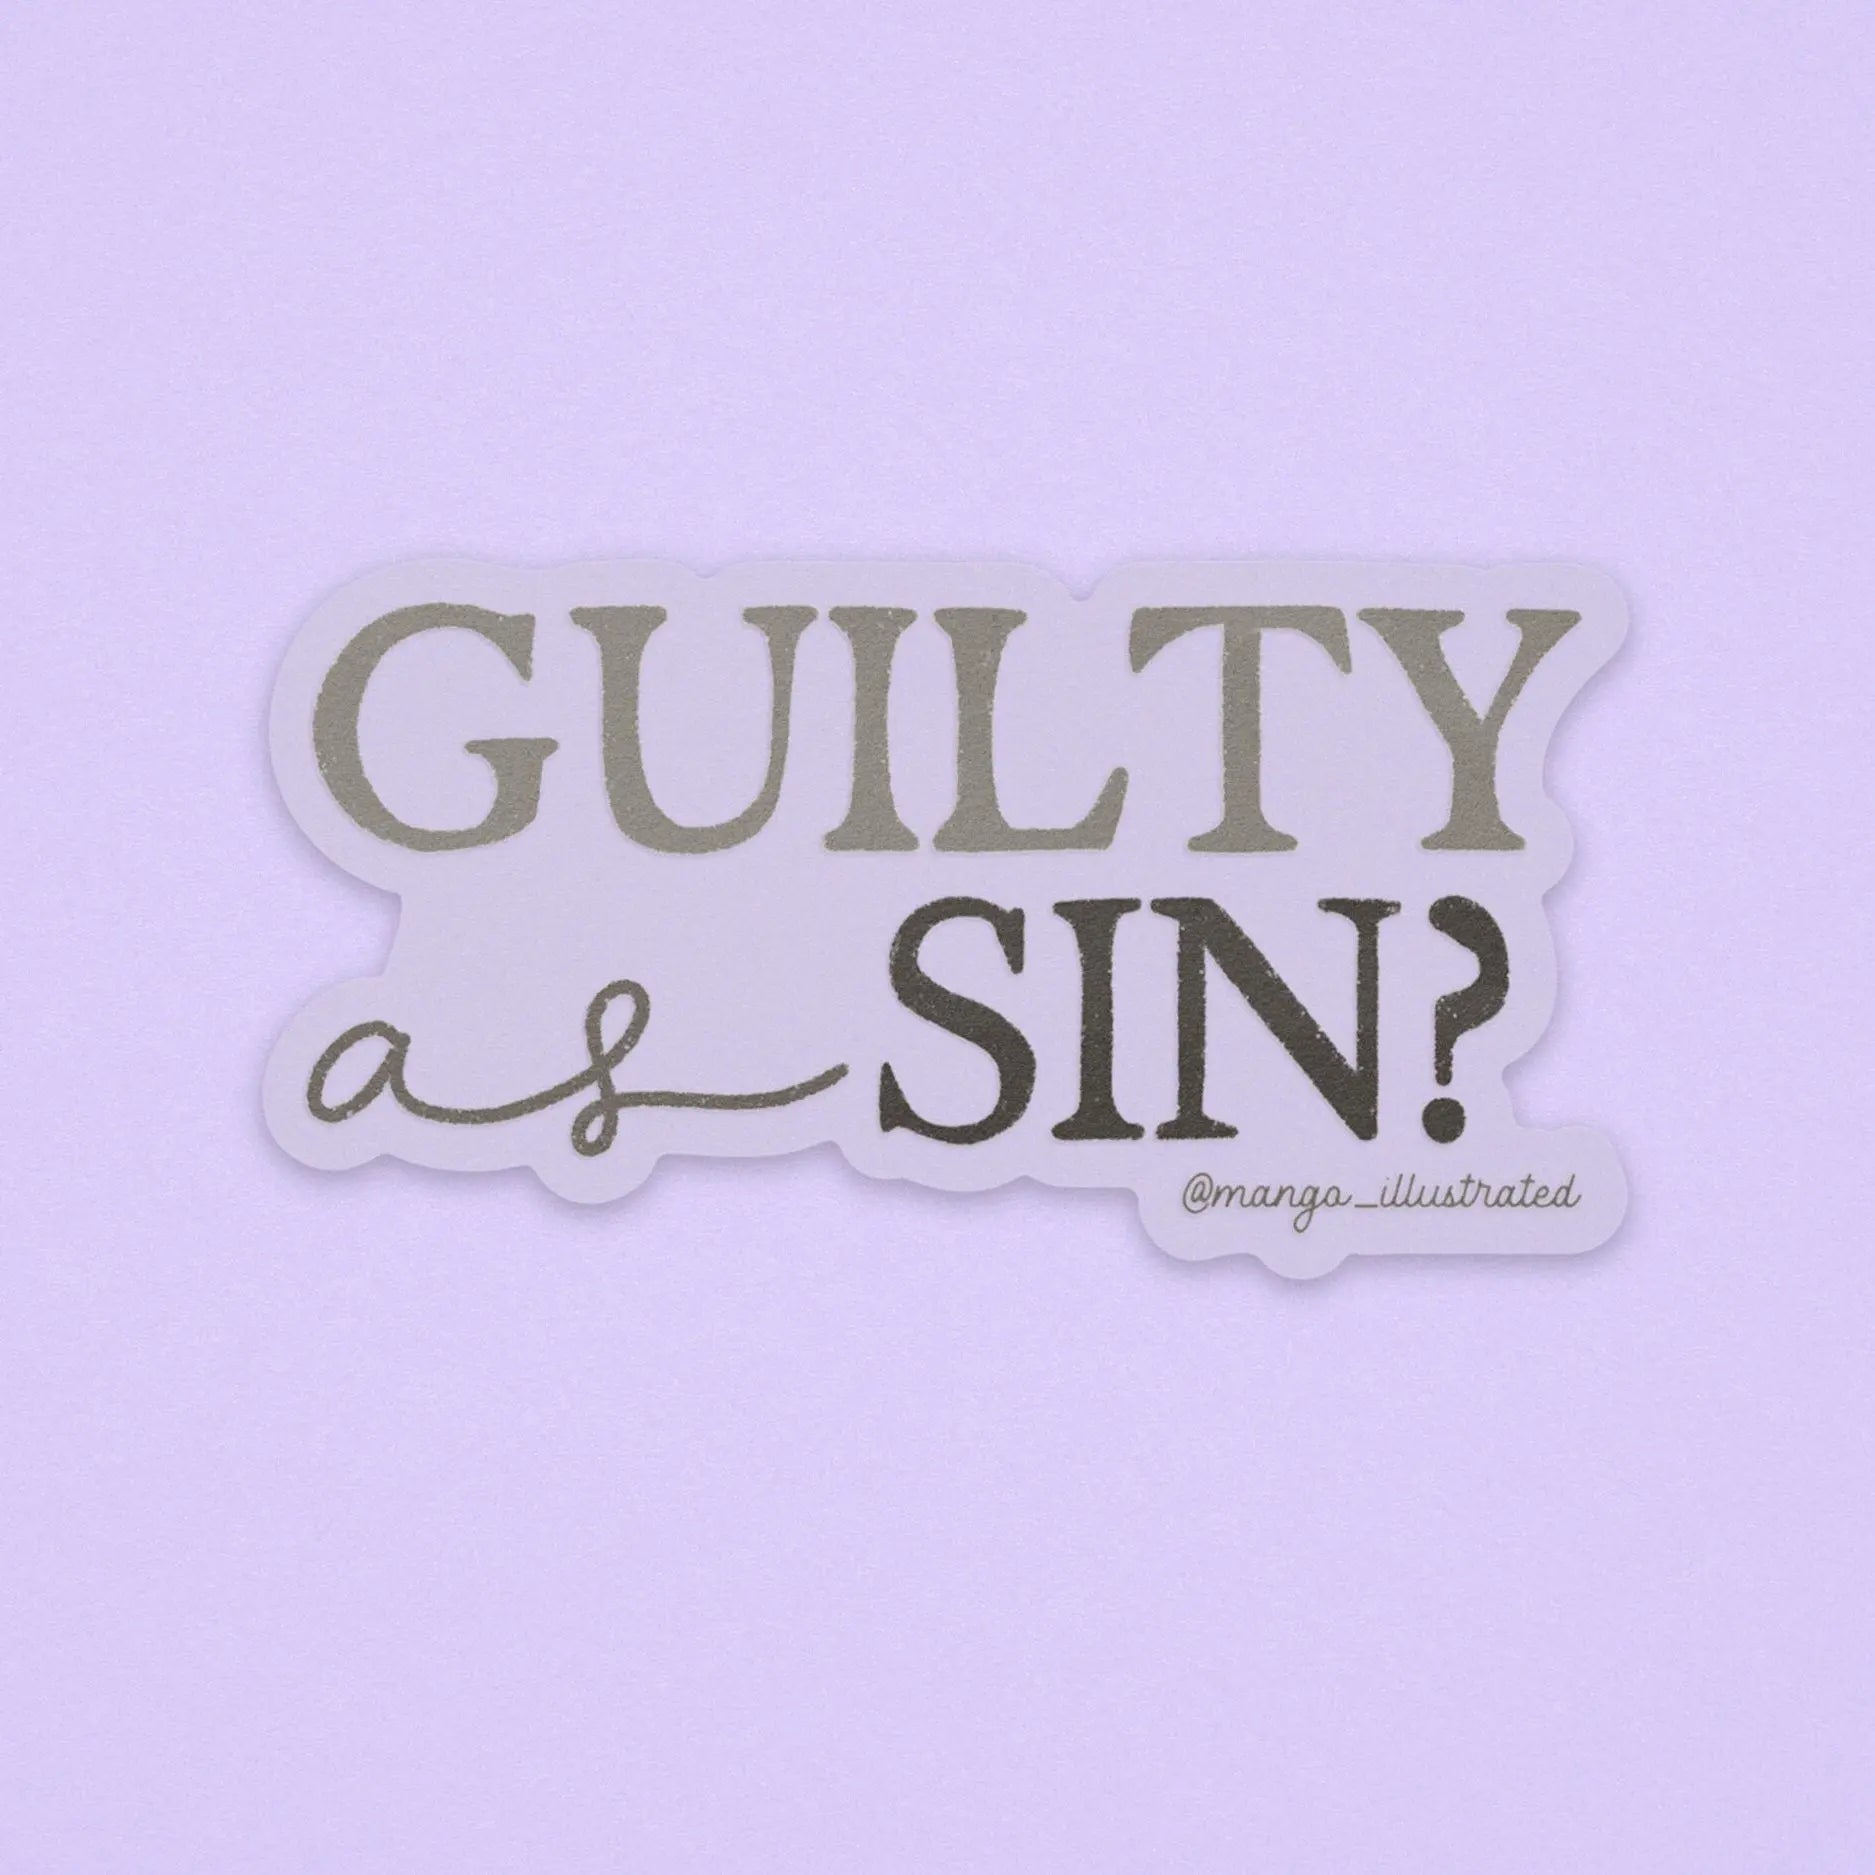 CLEAR Guilty as sin? sticker MangoIllustrated